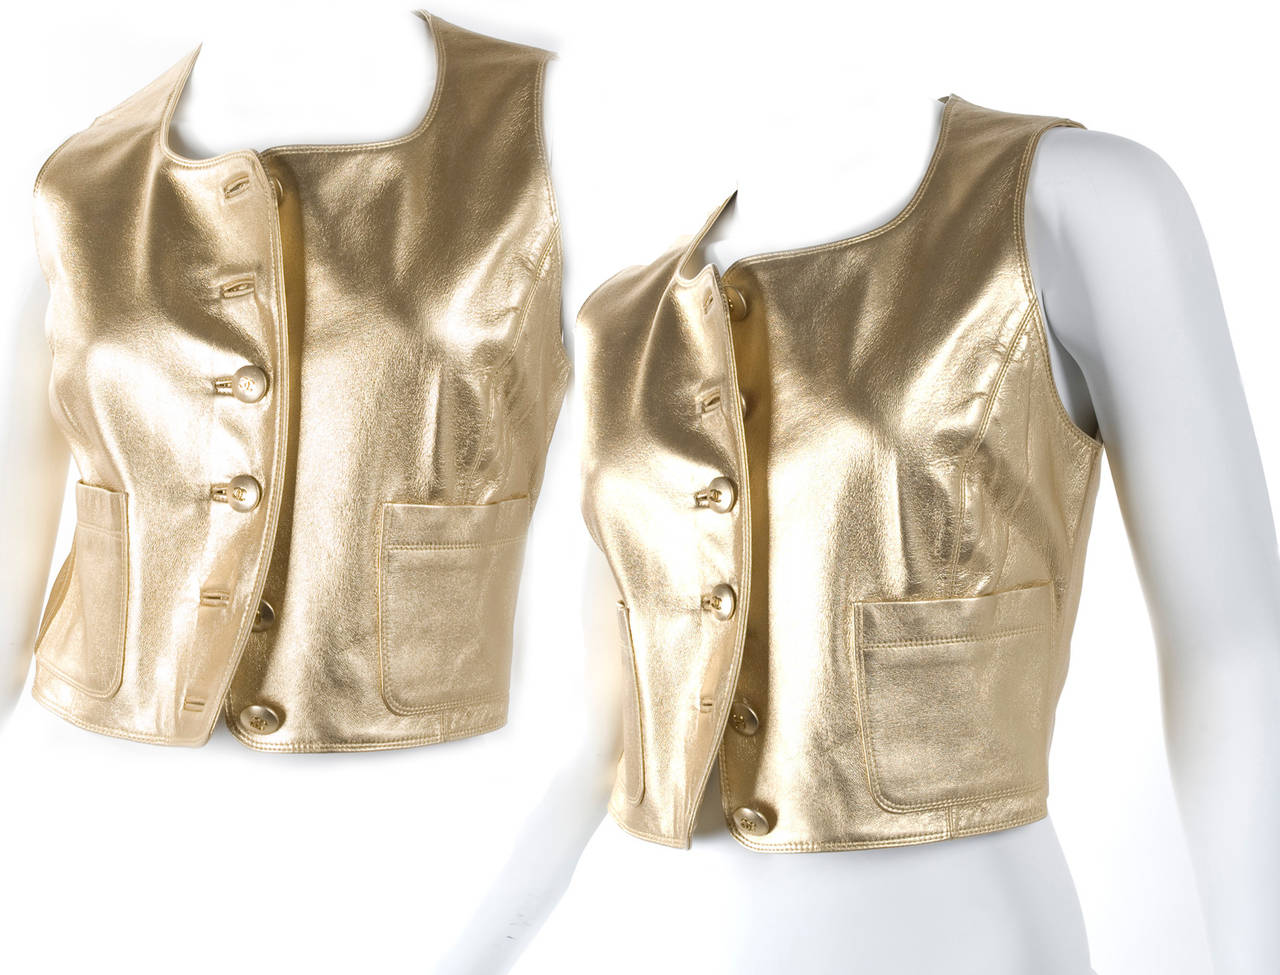 80's Chanel Leather Vest in Gold Lambskin.
Like new condition 
Size label missing about 36 EU - 4 to 6 US
Measurements:
Length 40.5 cm-  16.5